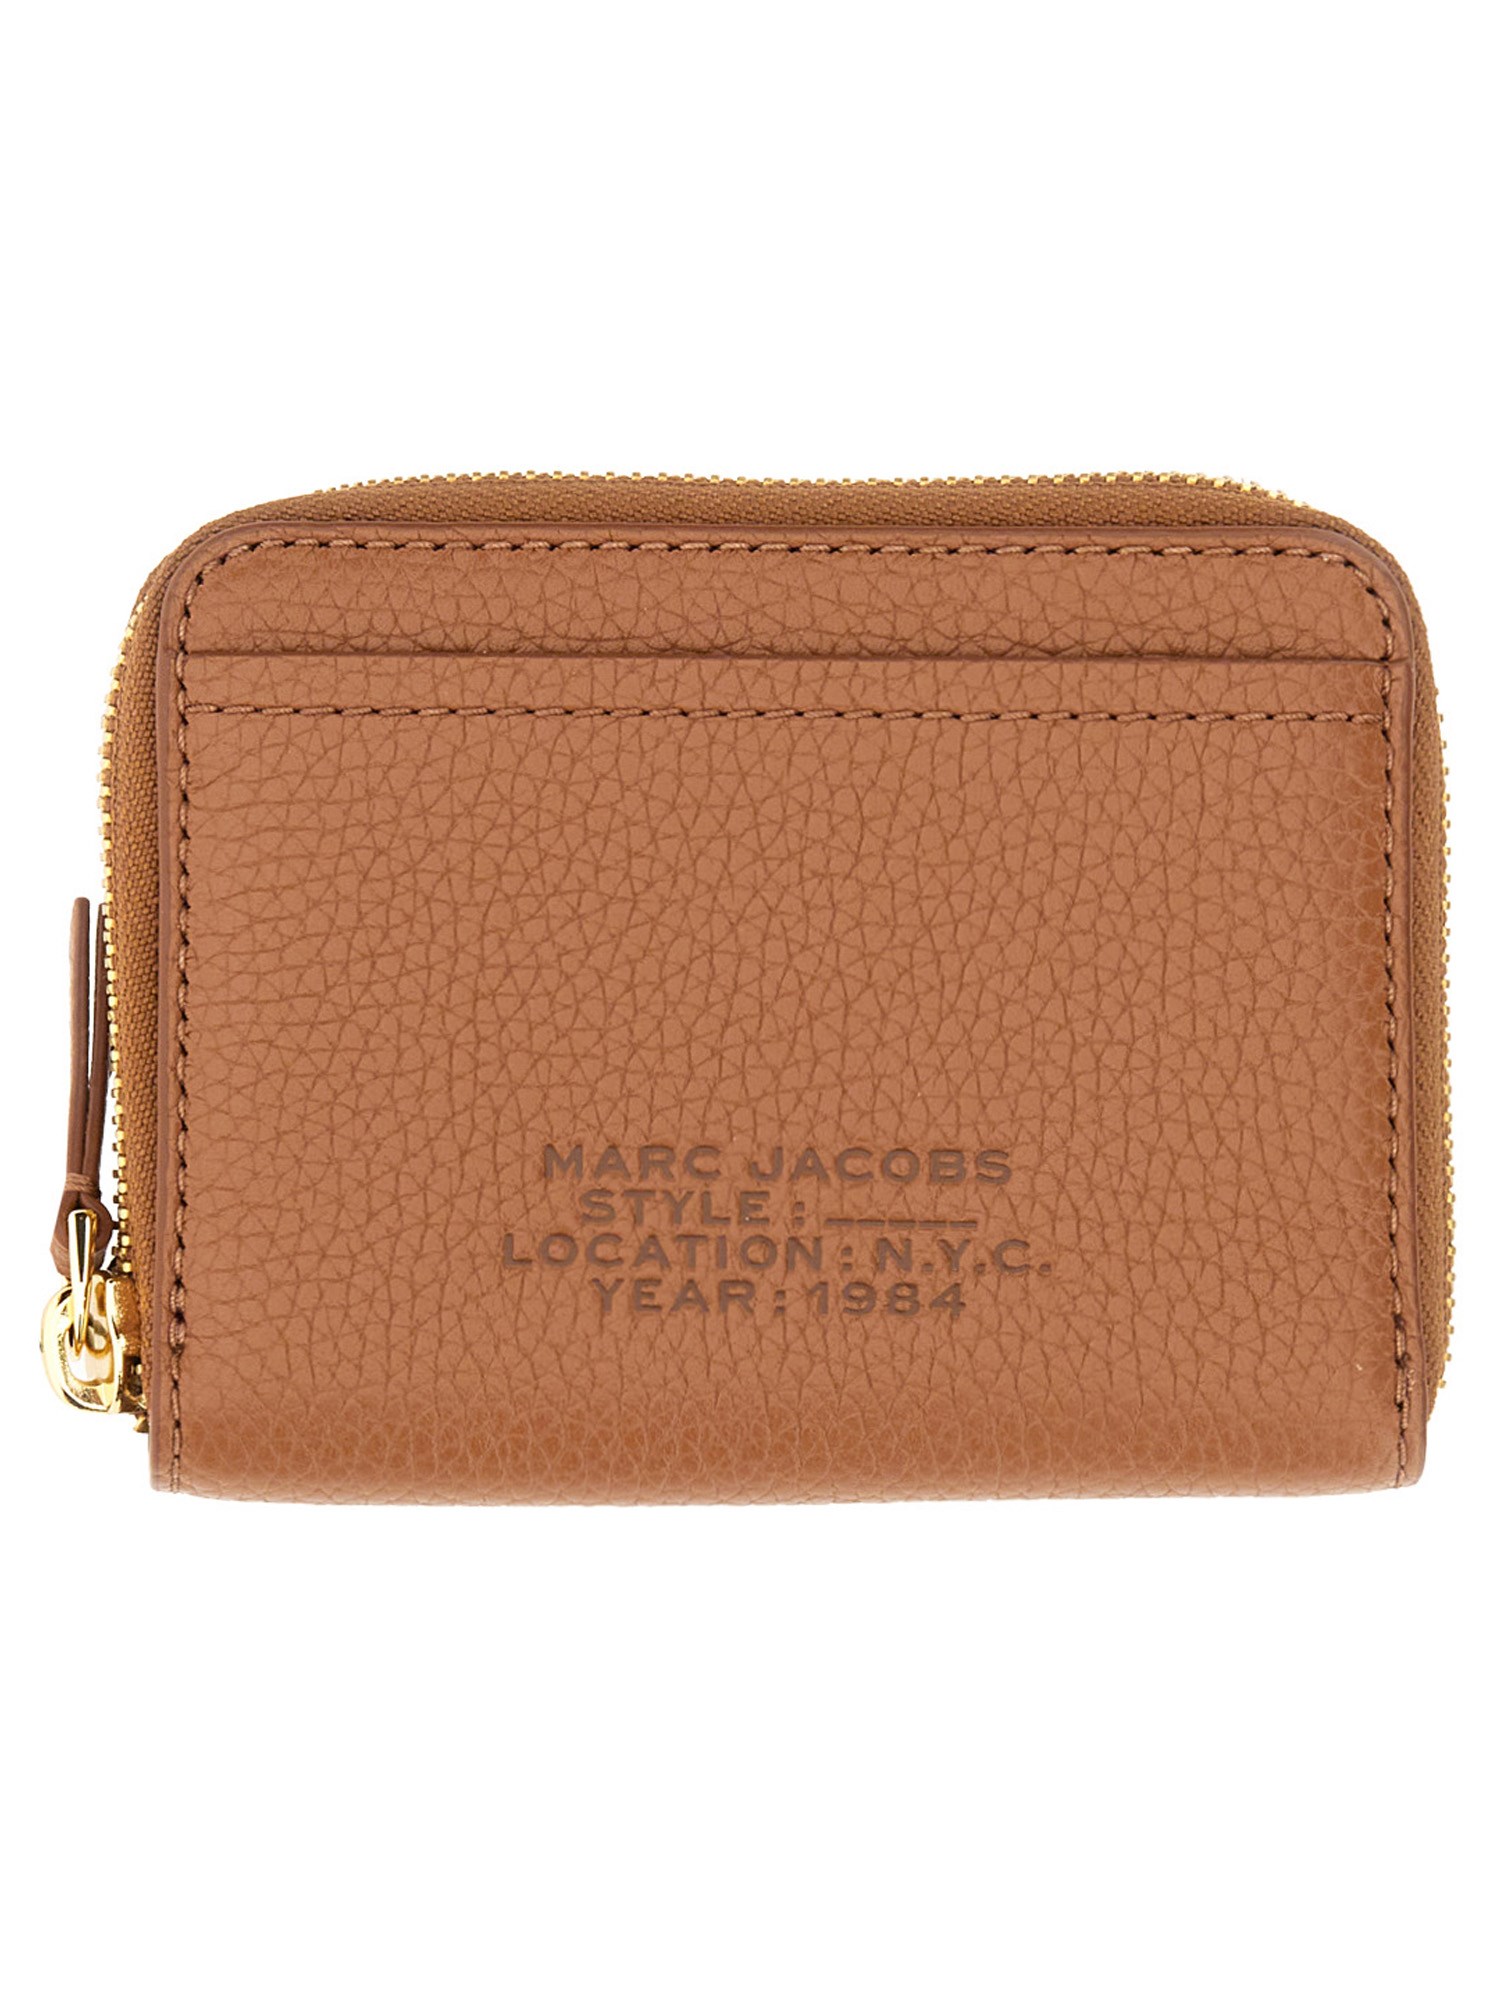 marc jacobs leather wallet with zipper